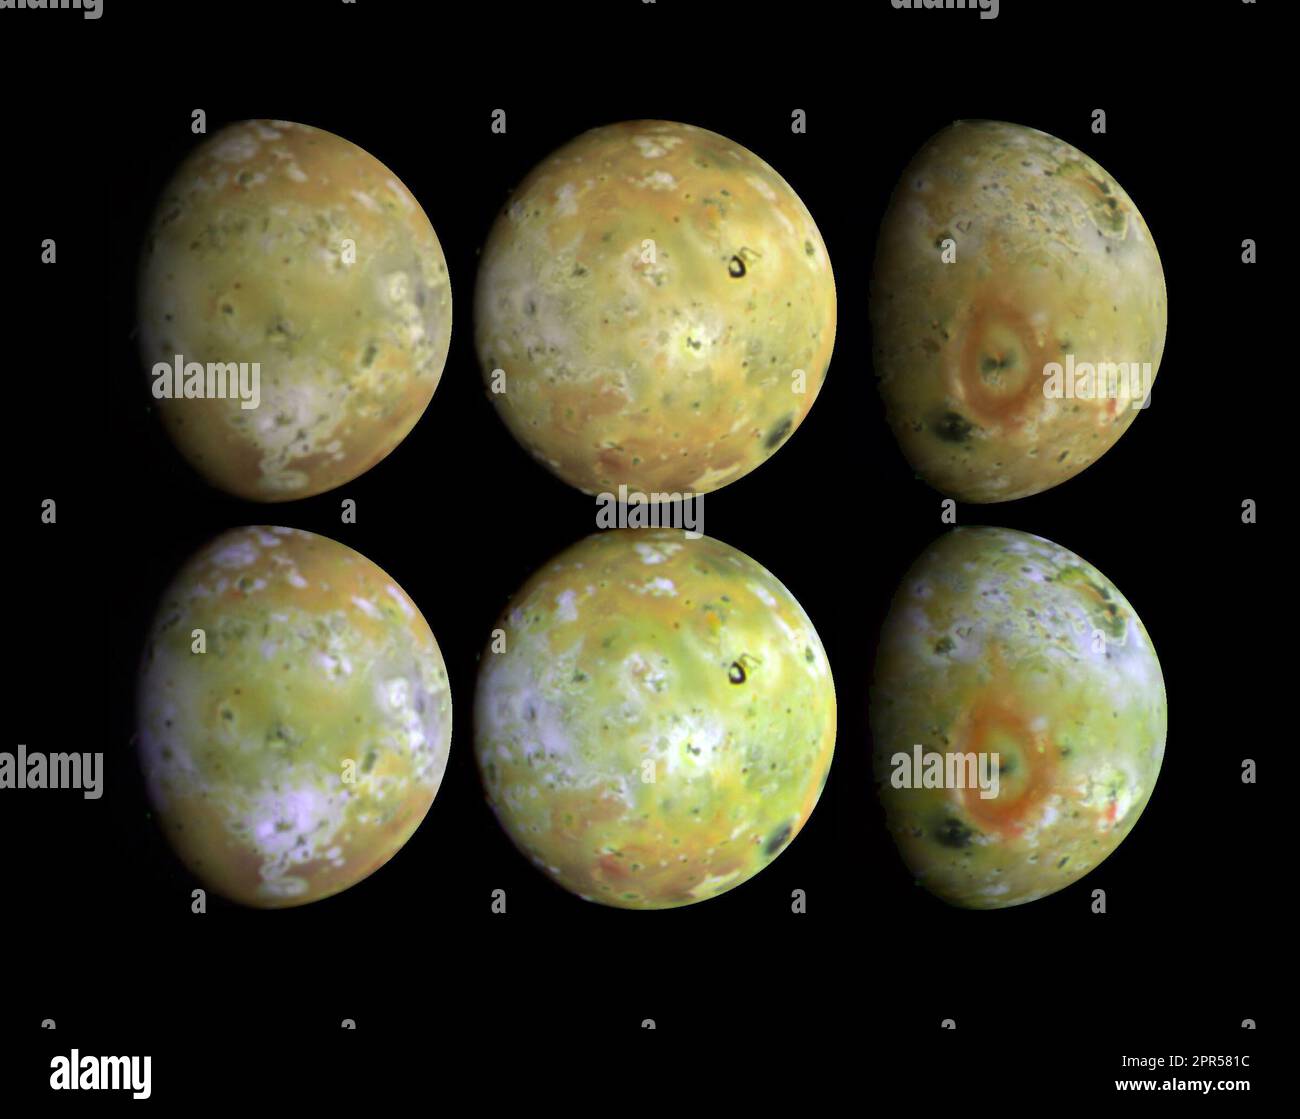 Three views of the full disk of Jupiter's volcanic moon, Io, each shown in natural and enhanced color. These three views, taken by Galileo in late June 1996, show about 75 percent of Io's surface. North is up. The top disks are intended to show the satellite in natural color (but colors will vary with display devices) while the bottom disks show enhanced color (near-infrared, green, and violet filtered images) to highlight details of the surface. These images reveal that some areas on Io are truly red, whereas much of the surface is yellow or light greenish. (Accurate natural color renditions Stock Photo